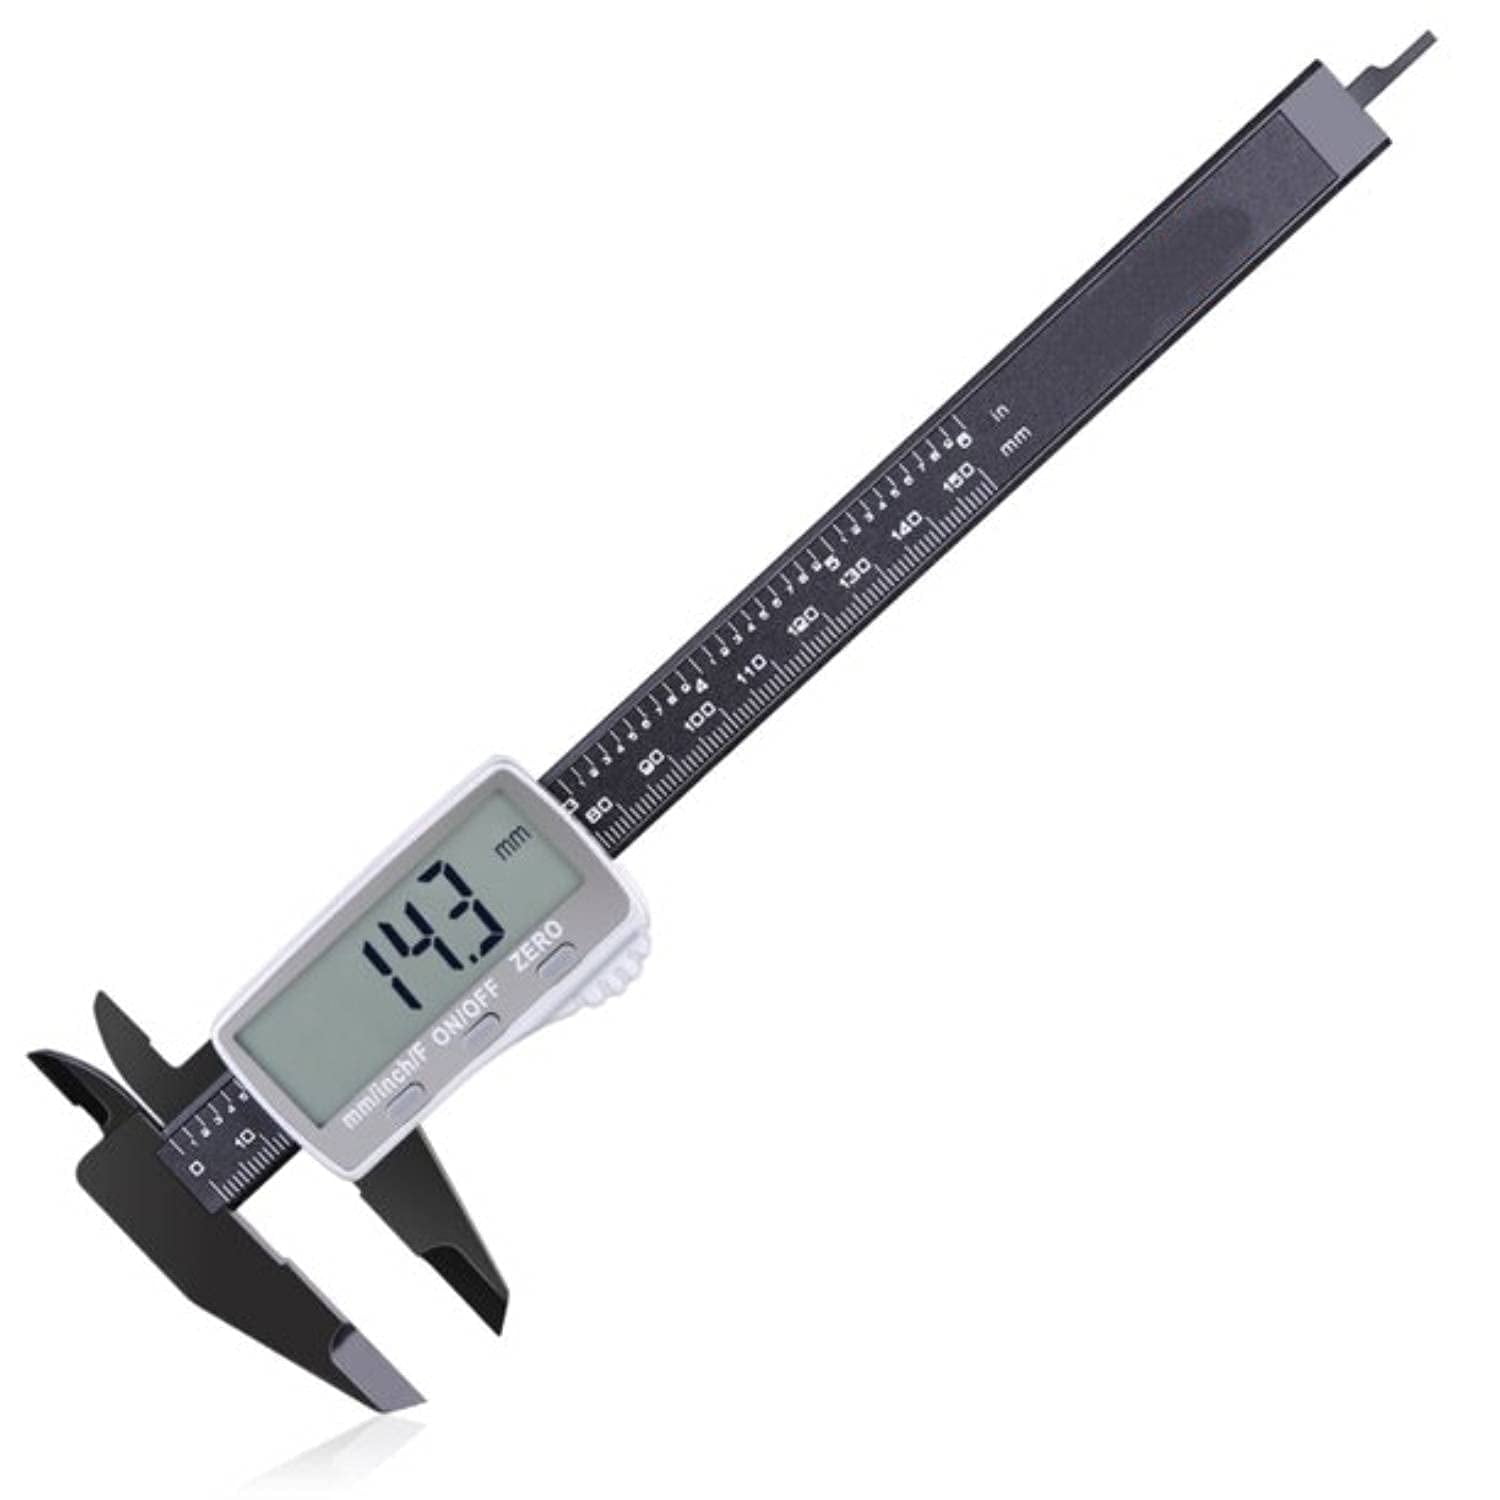 6" INCH STAINLESS STEEL VERNIER CALIPER WITH PVC STORAGE BOX 